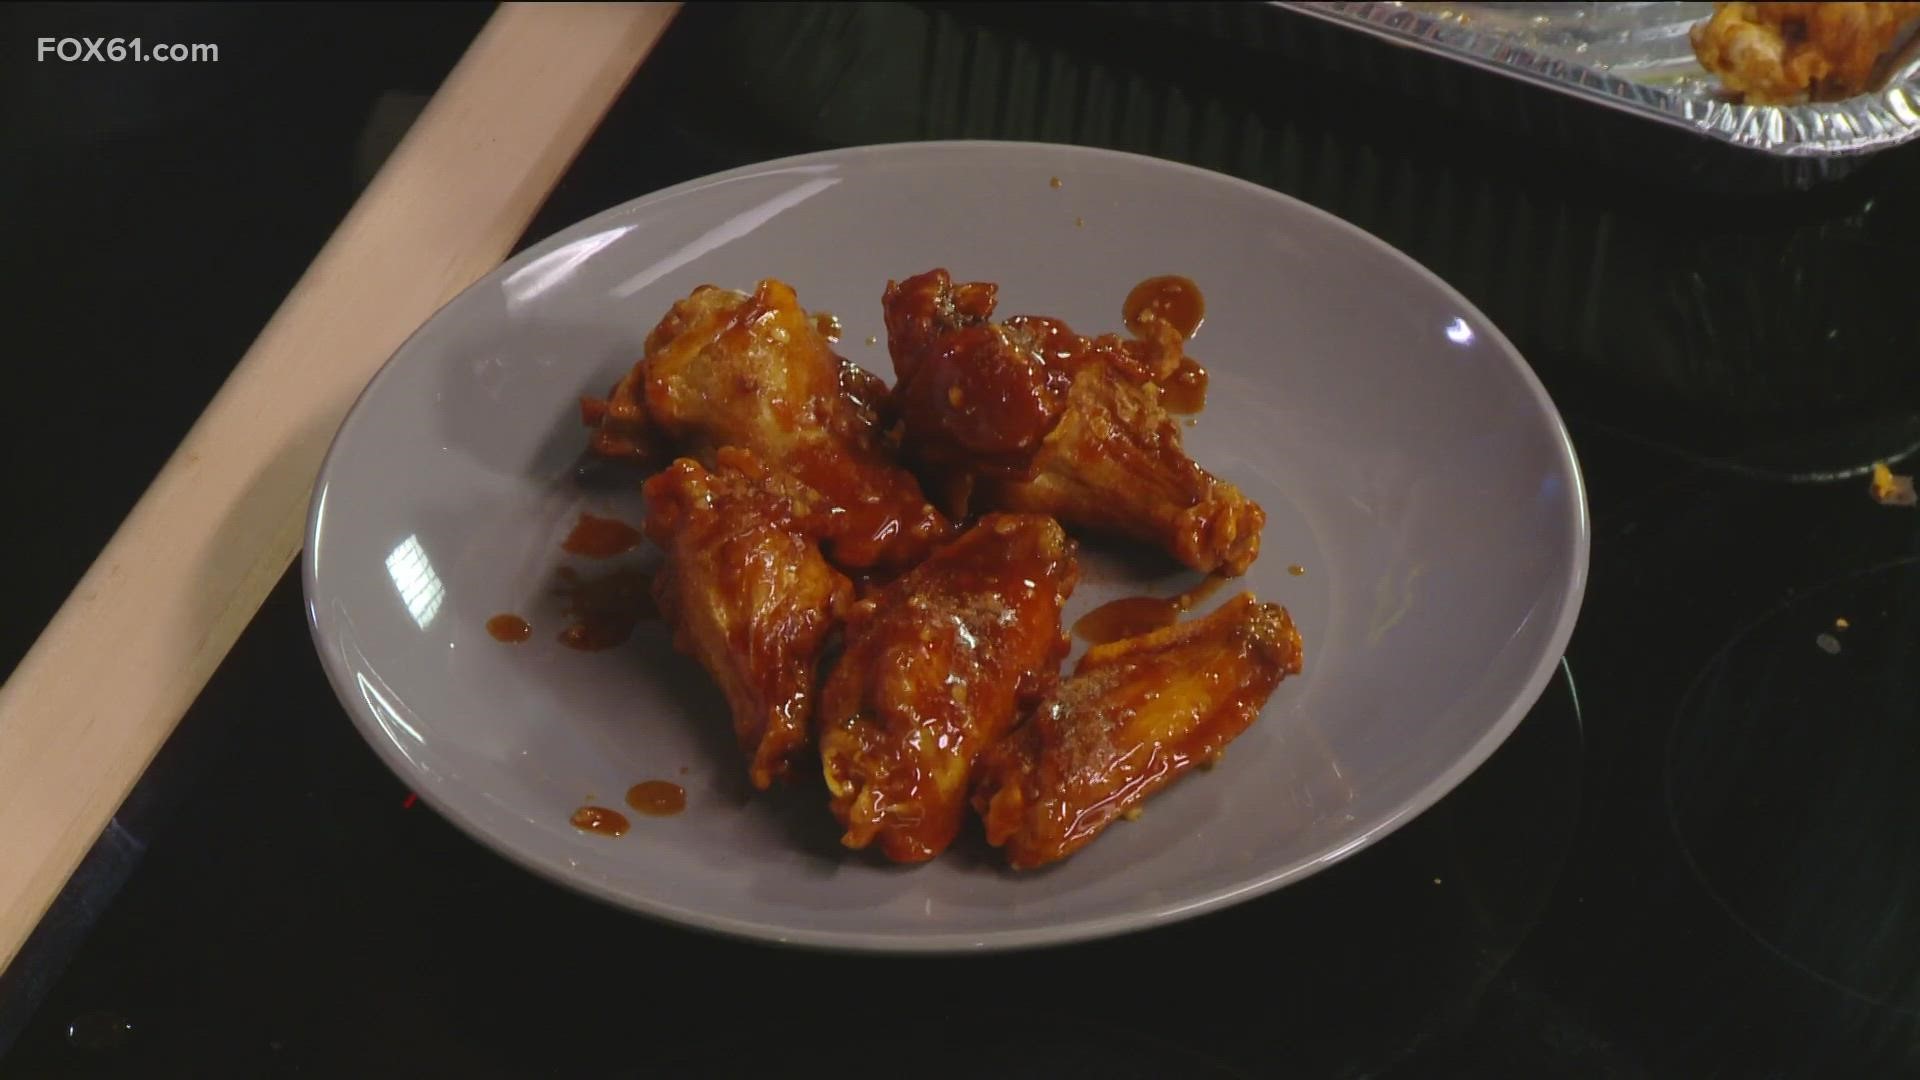 JJ Stacks in Brookfield shows off its chicken wings with over 70 different varieties and other big game eats.